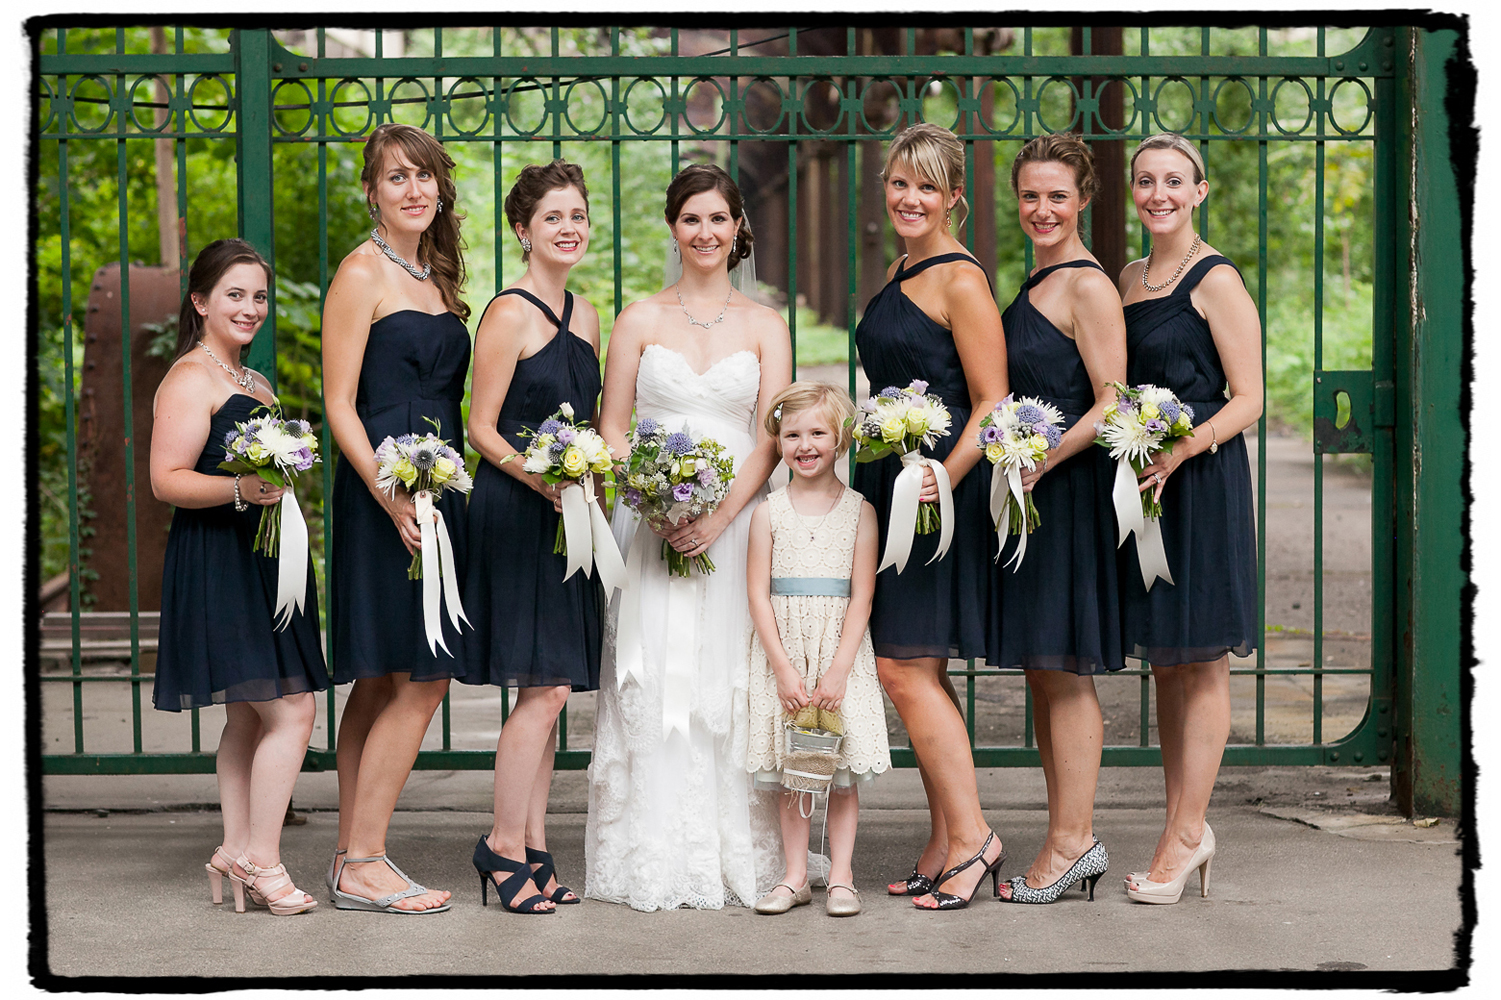 Lauren and her bridesmaids and flowergirl looked lovely at this Liberty House wedding in Jersey City.